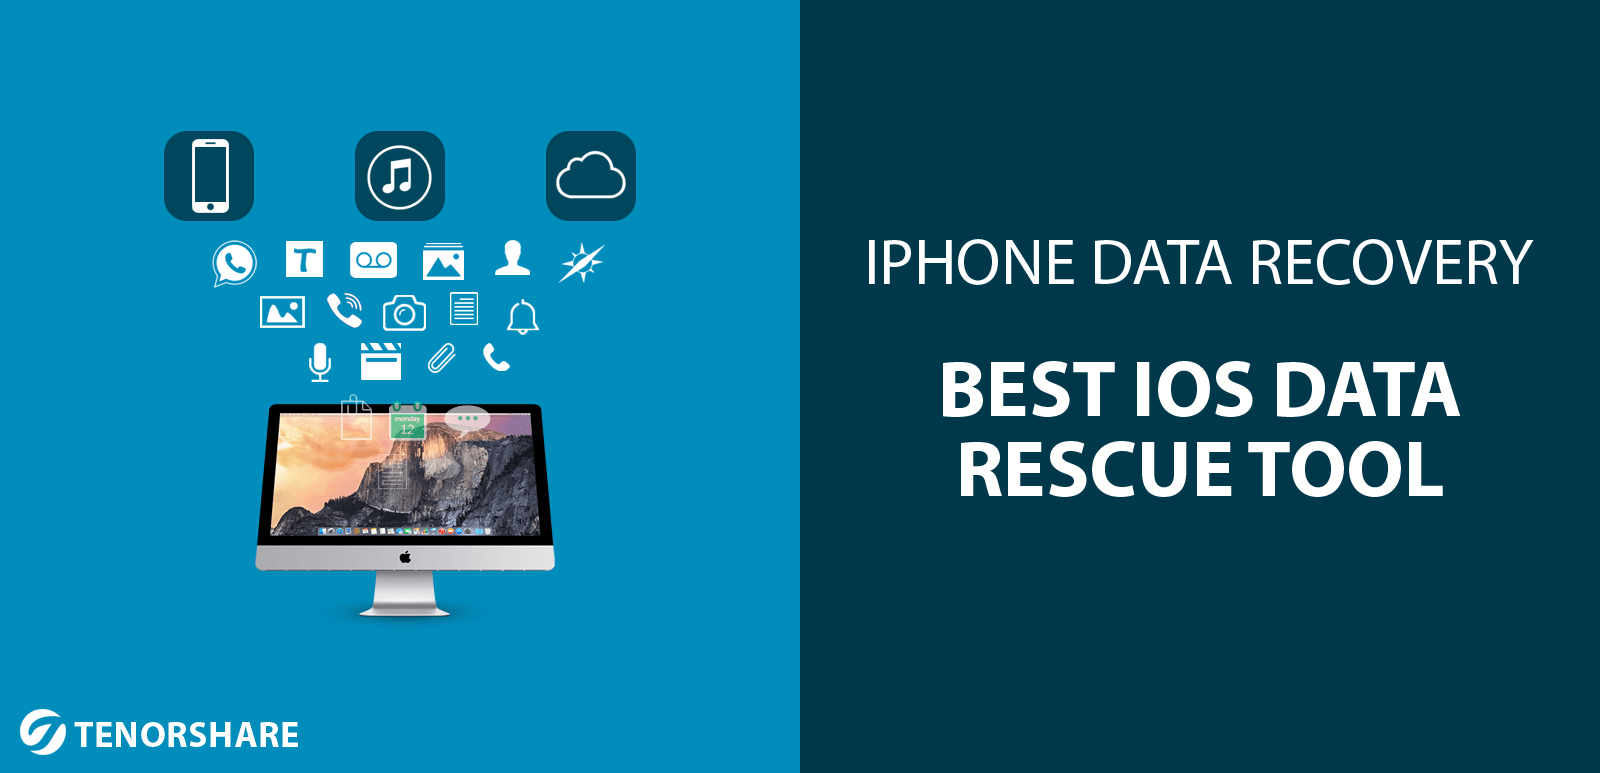 iPhone Data Recovery for Mac offers total access to your iOS device's backup files, including from iTunes and iCloud.